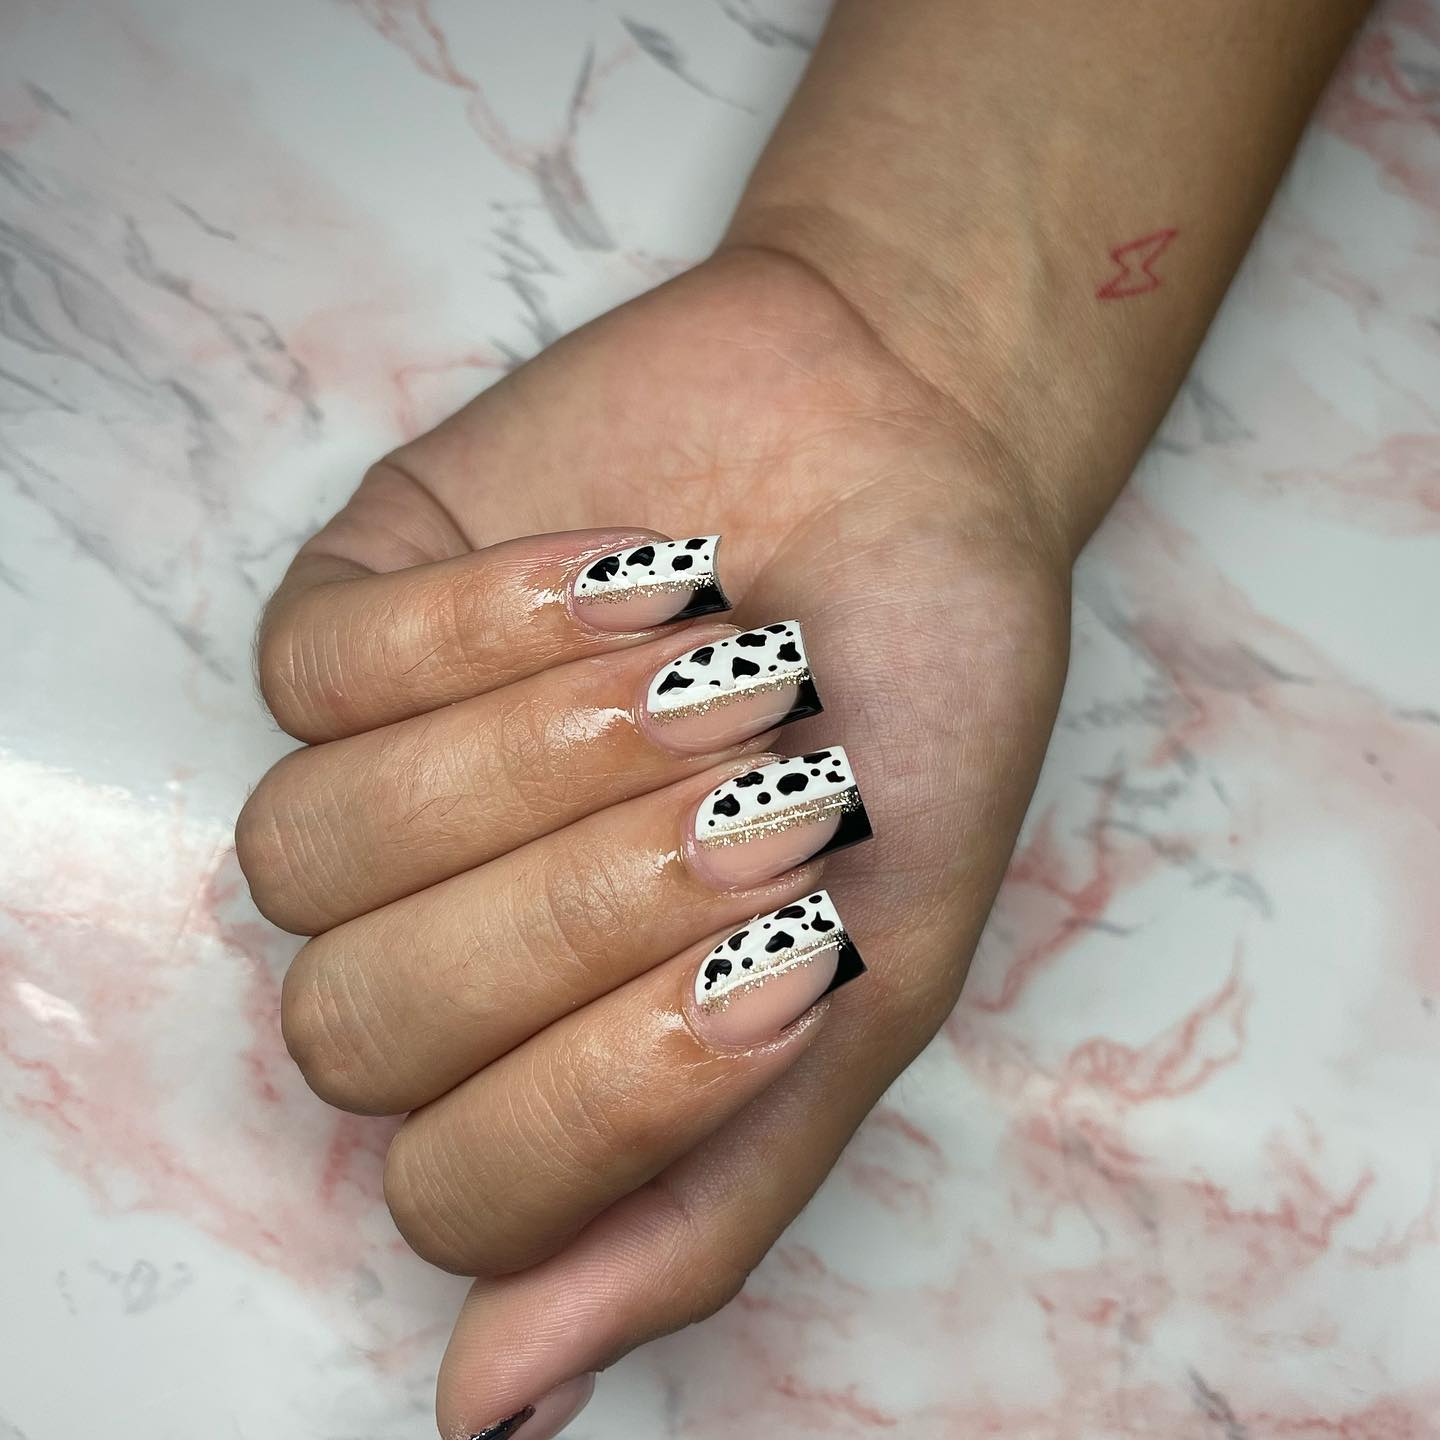 Half black French manicure and half cow print nail art sound crazy, don't they? Let's apply and divide them with a glittered line. To have the perfect balance of cute and classy, give it a shot.